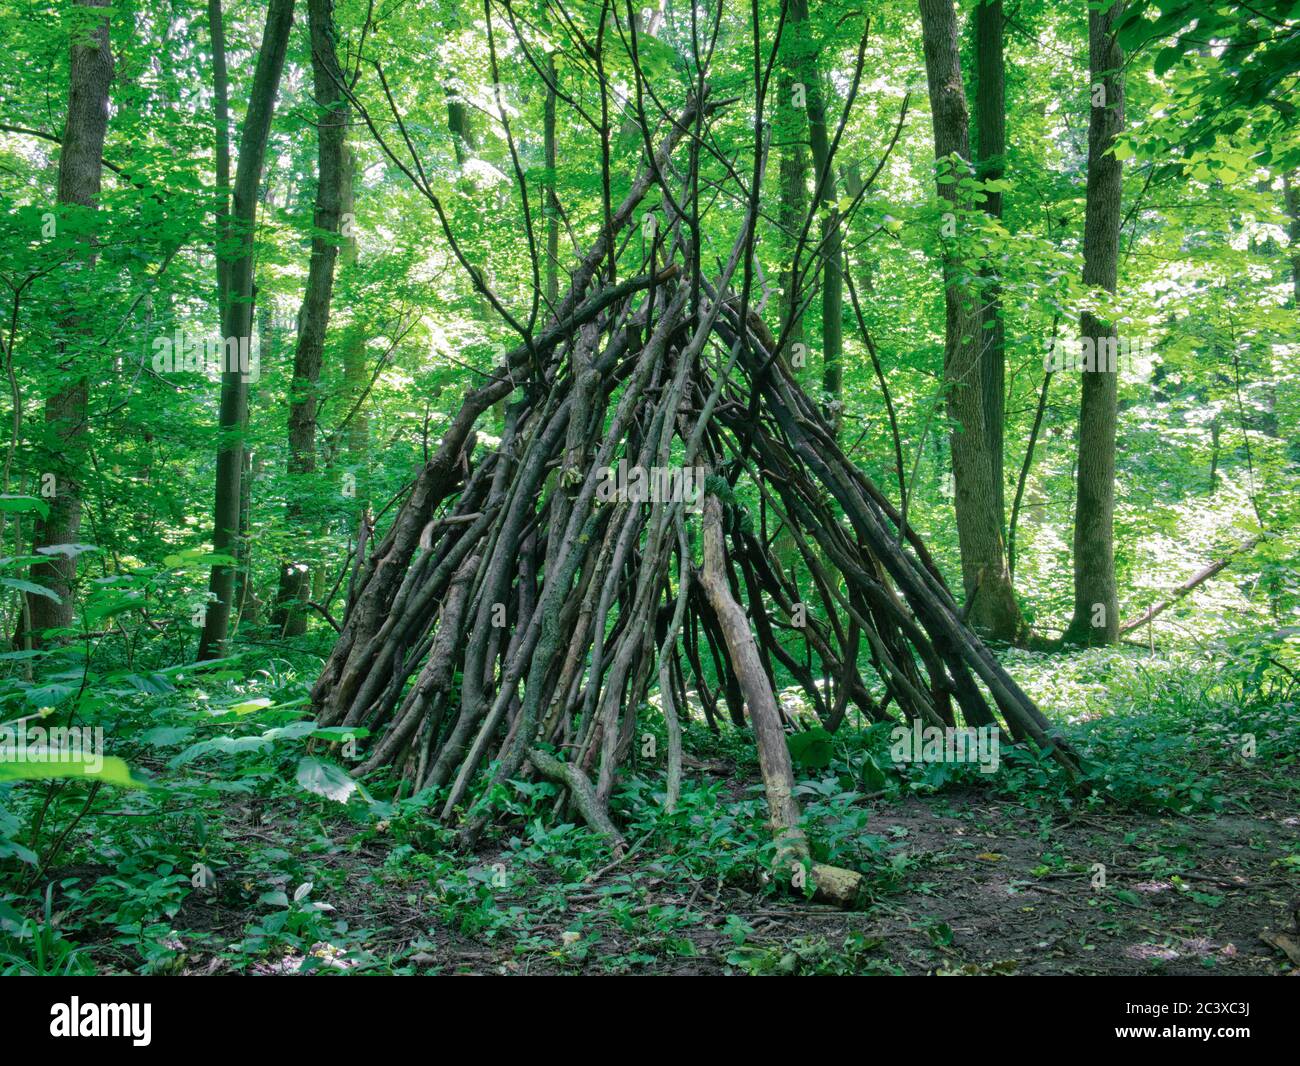 Survival shelter in the woods made from tree branches. Stock Photo